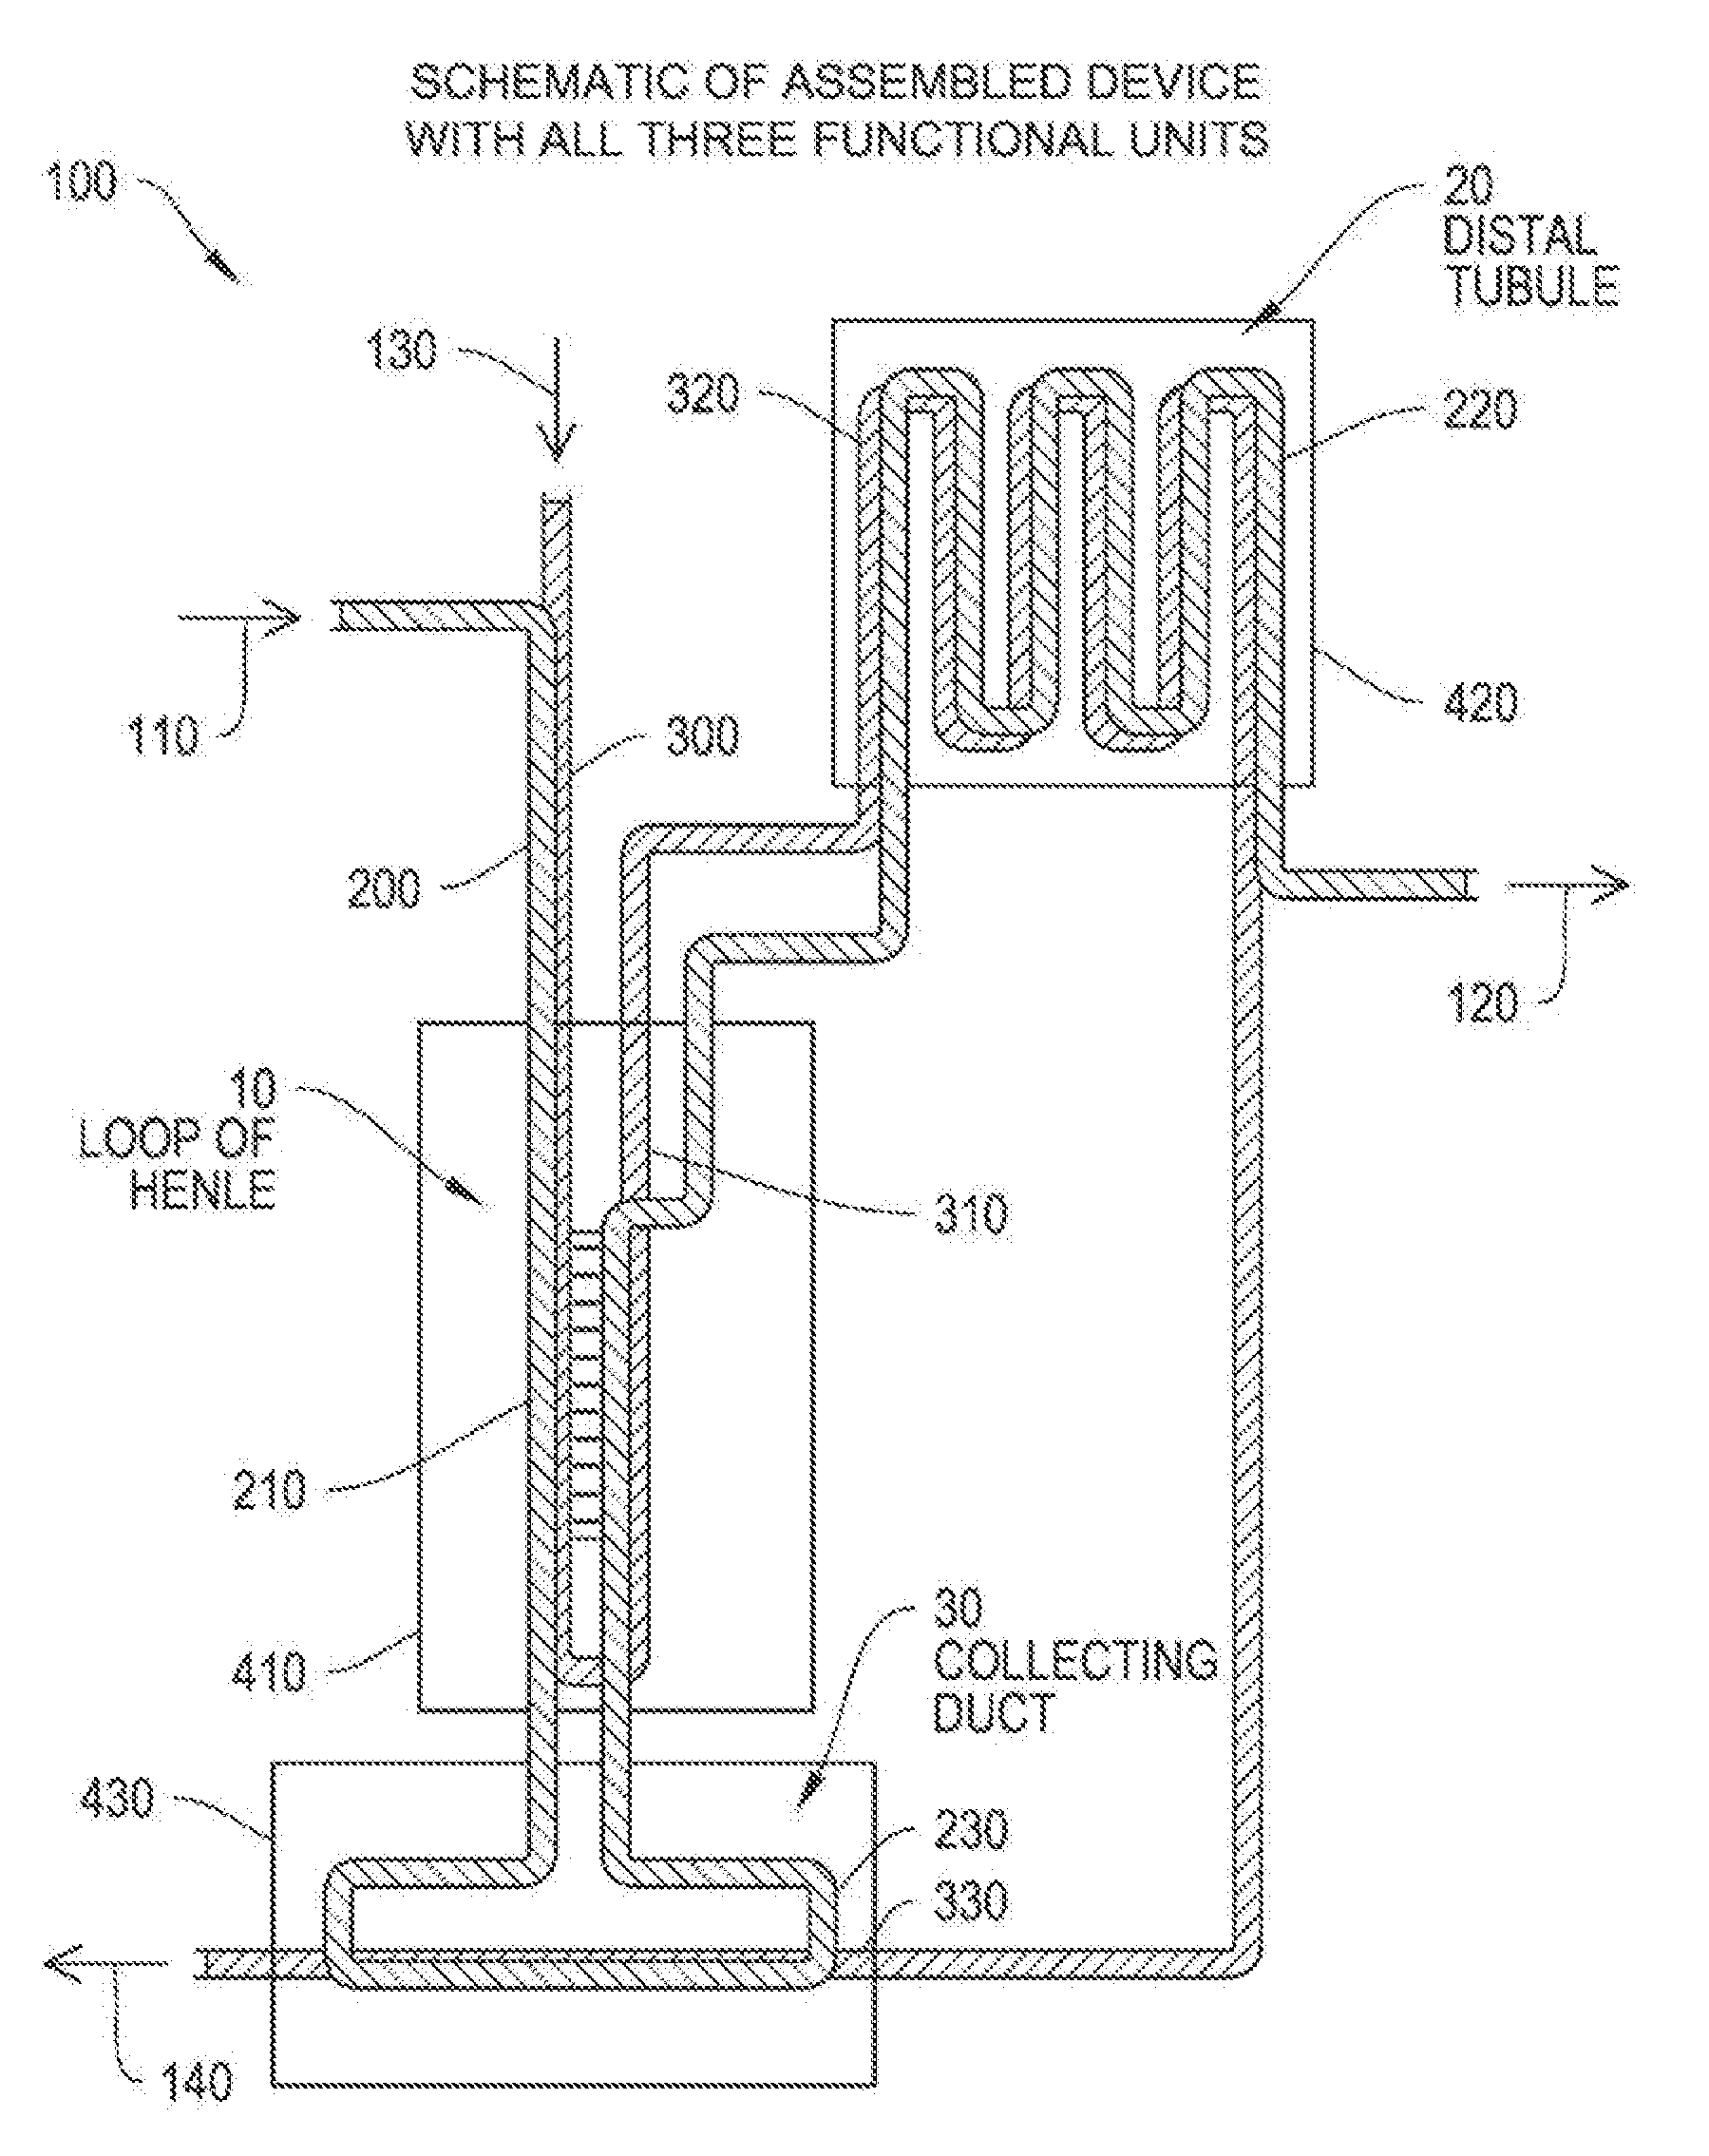 Systems, methods and devices relating to a cellularized nephron unit